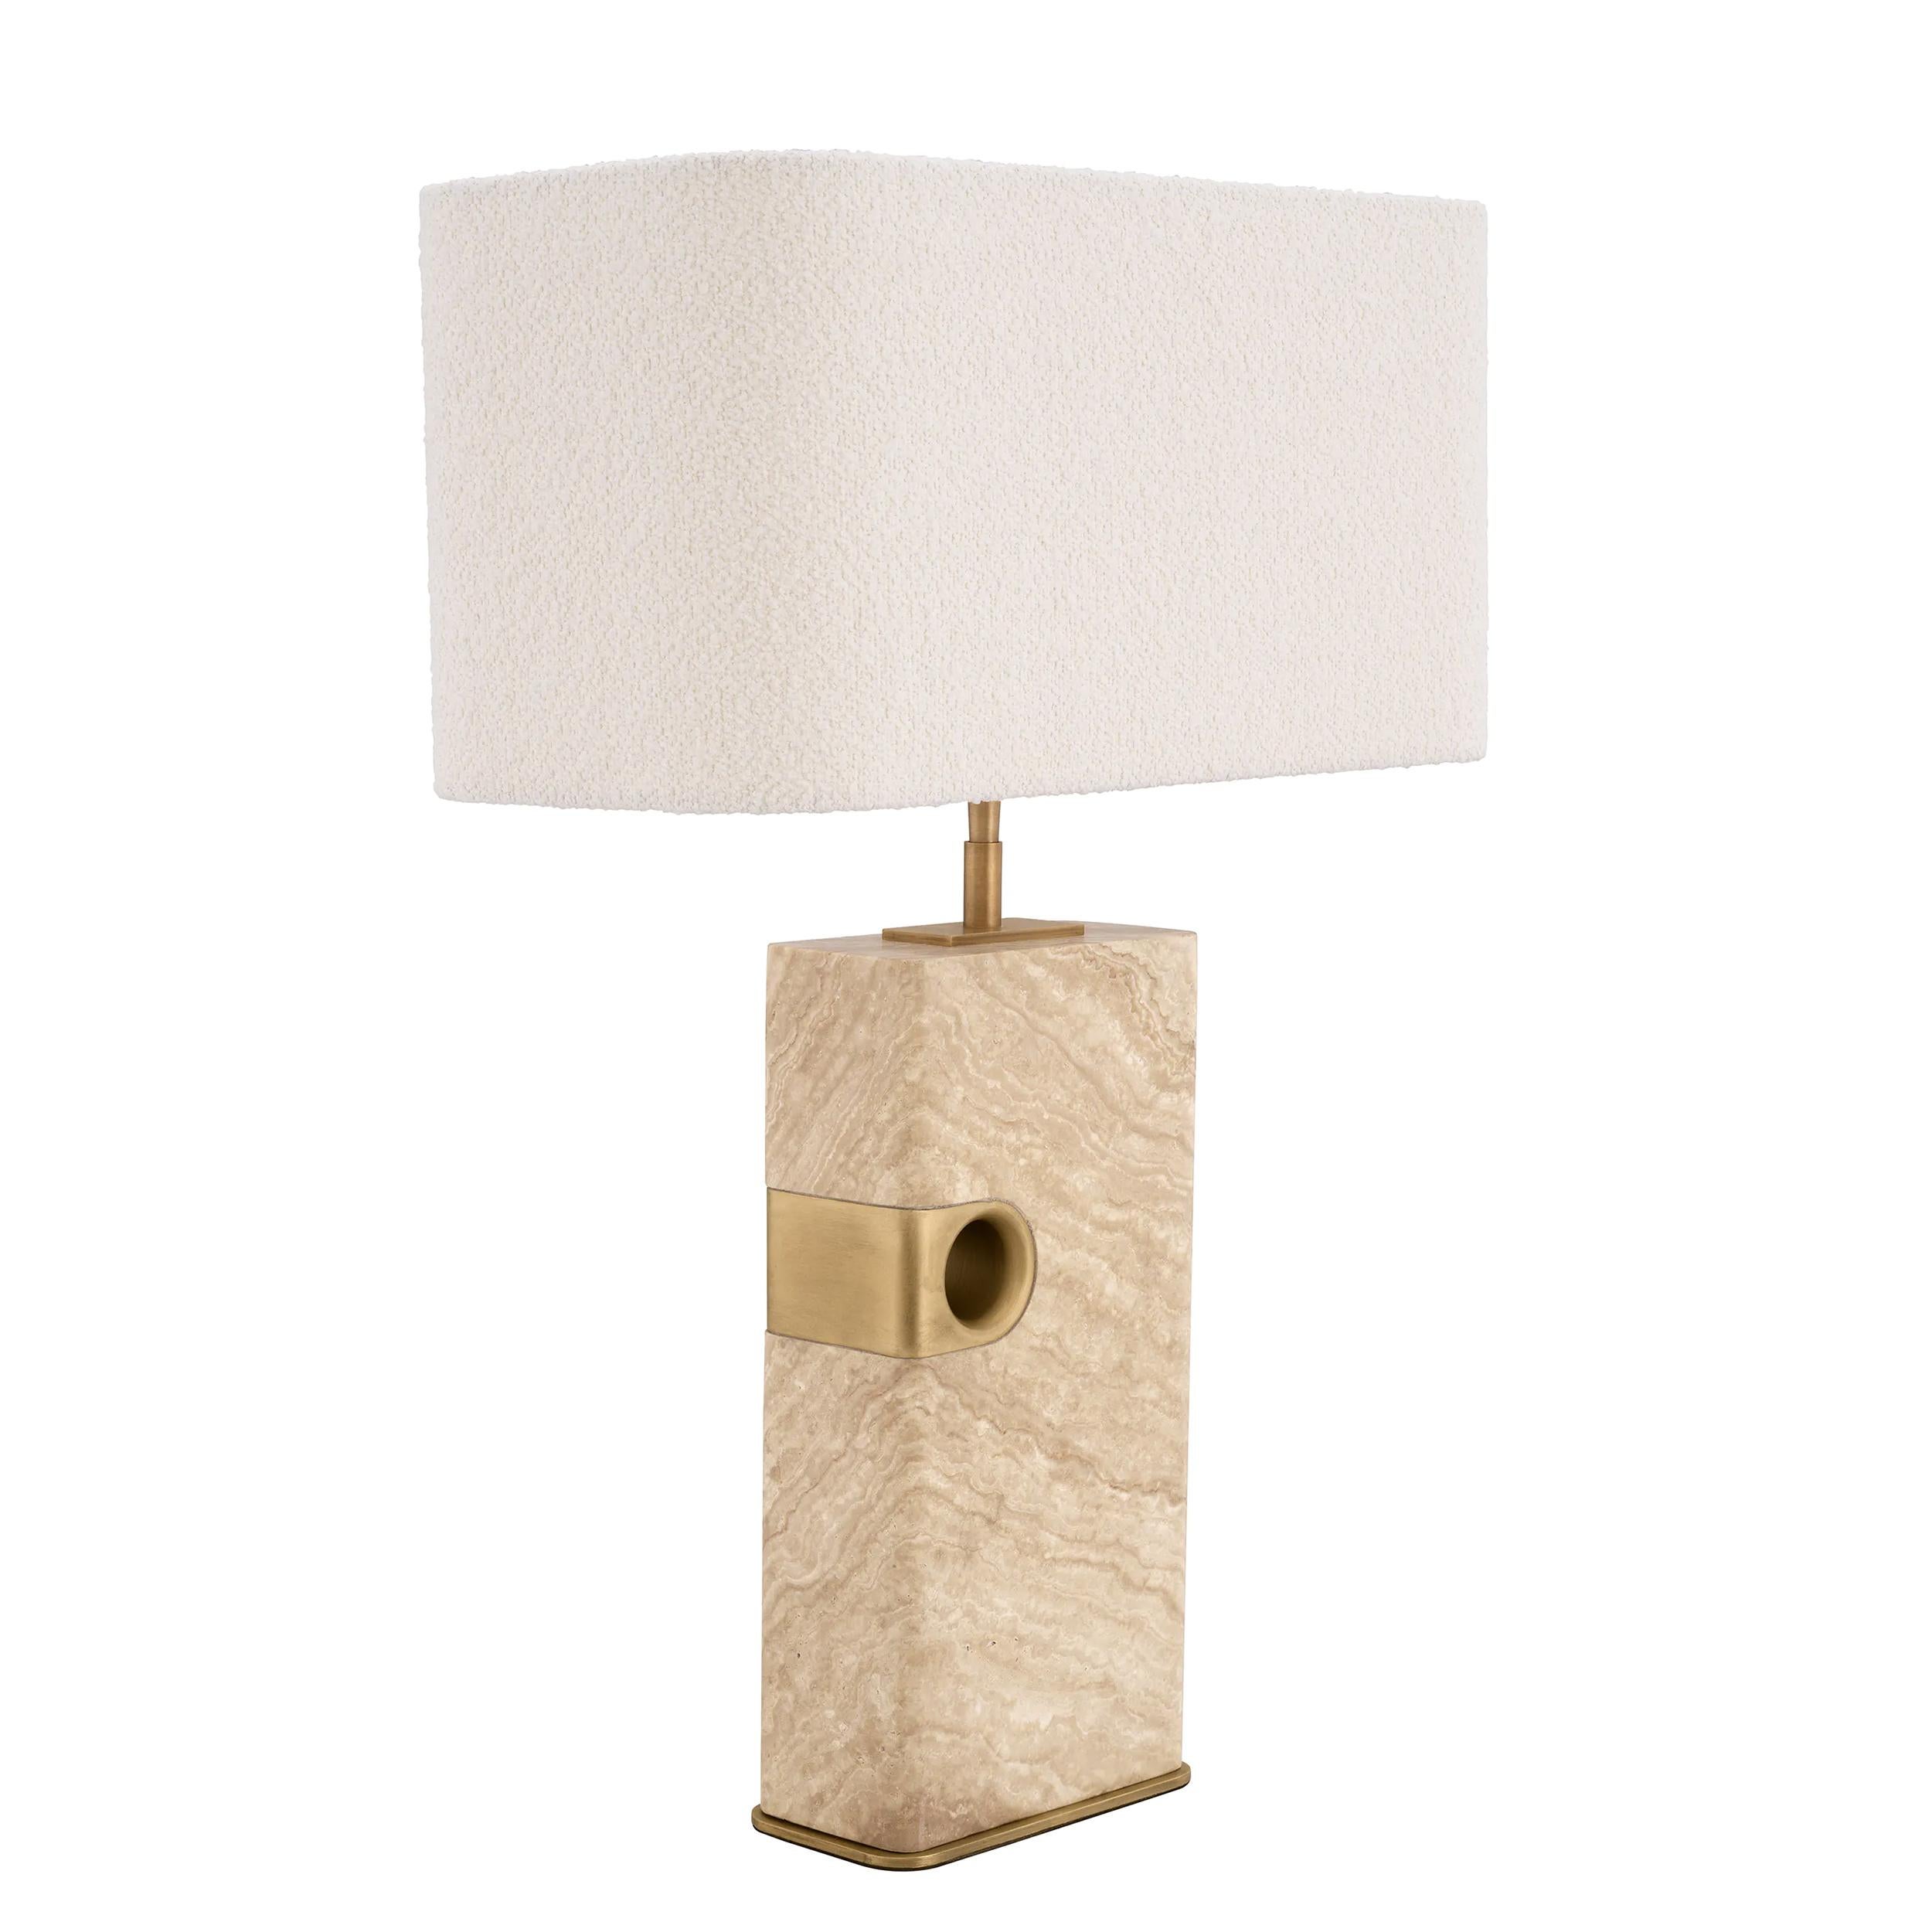 Table Lamp Madura with base in carved and polished travertine
with solid brass details in brushed vintage finish. Including shade
in bouclé fabric with steel frame. 1 bulb, lamp holder type E27, max
40 watt. bulb not included. Shade dimensions: